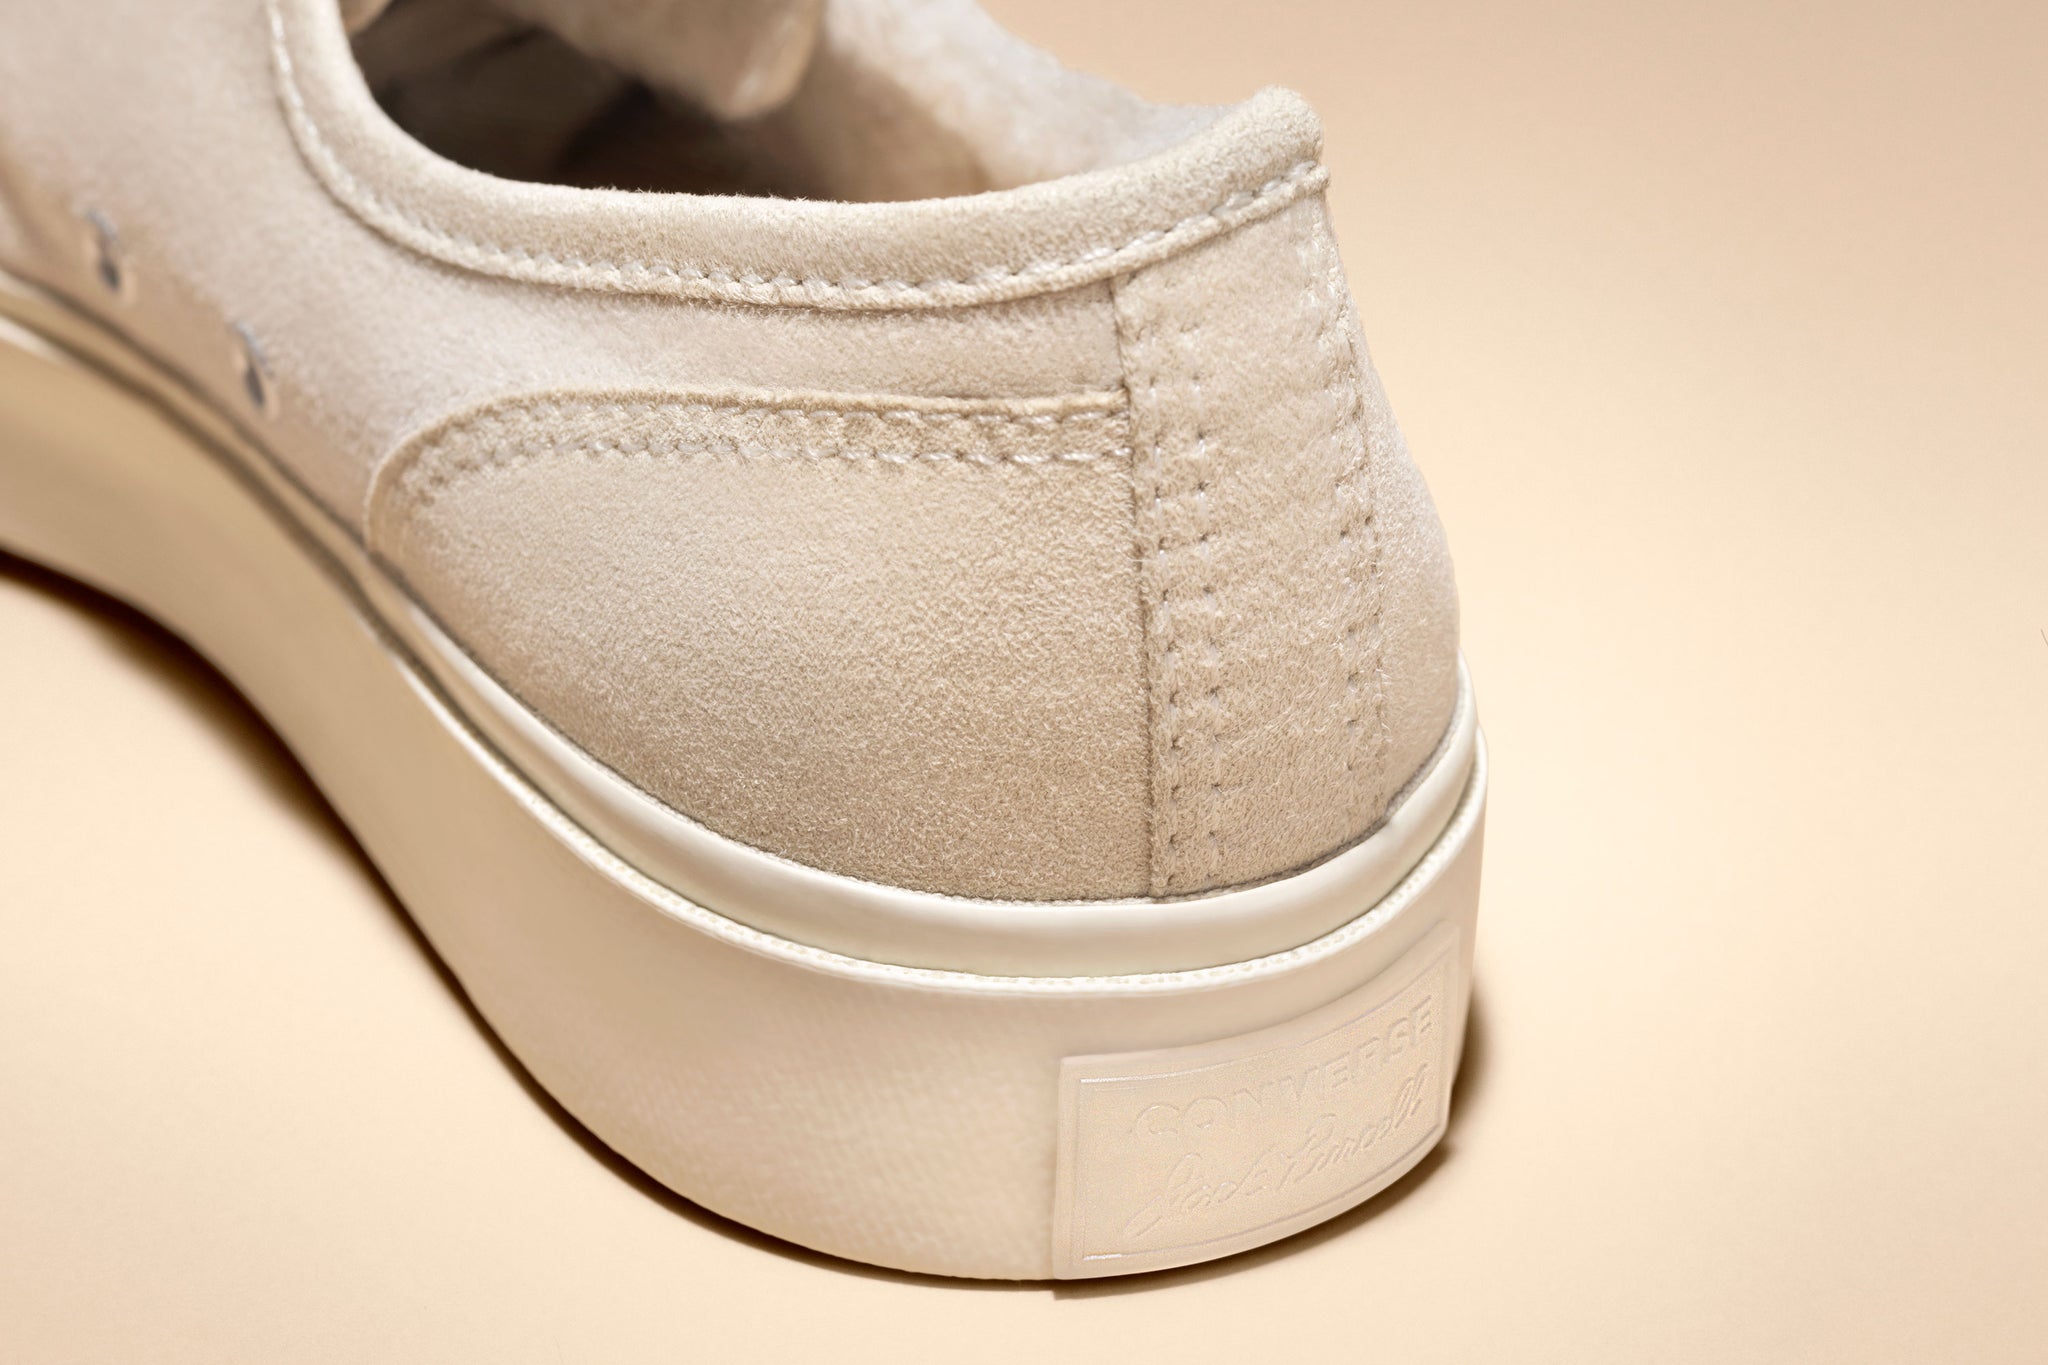 CLOT x Converse "ICE 70 Jack Purcell Collection –